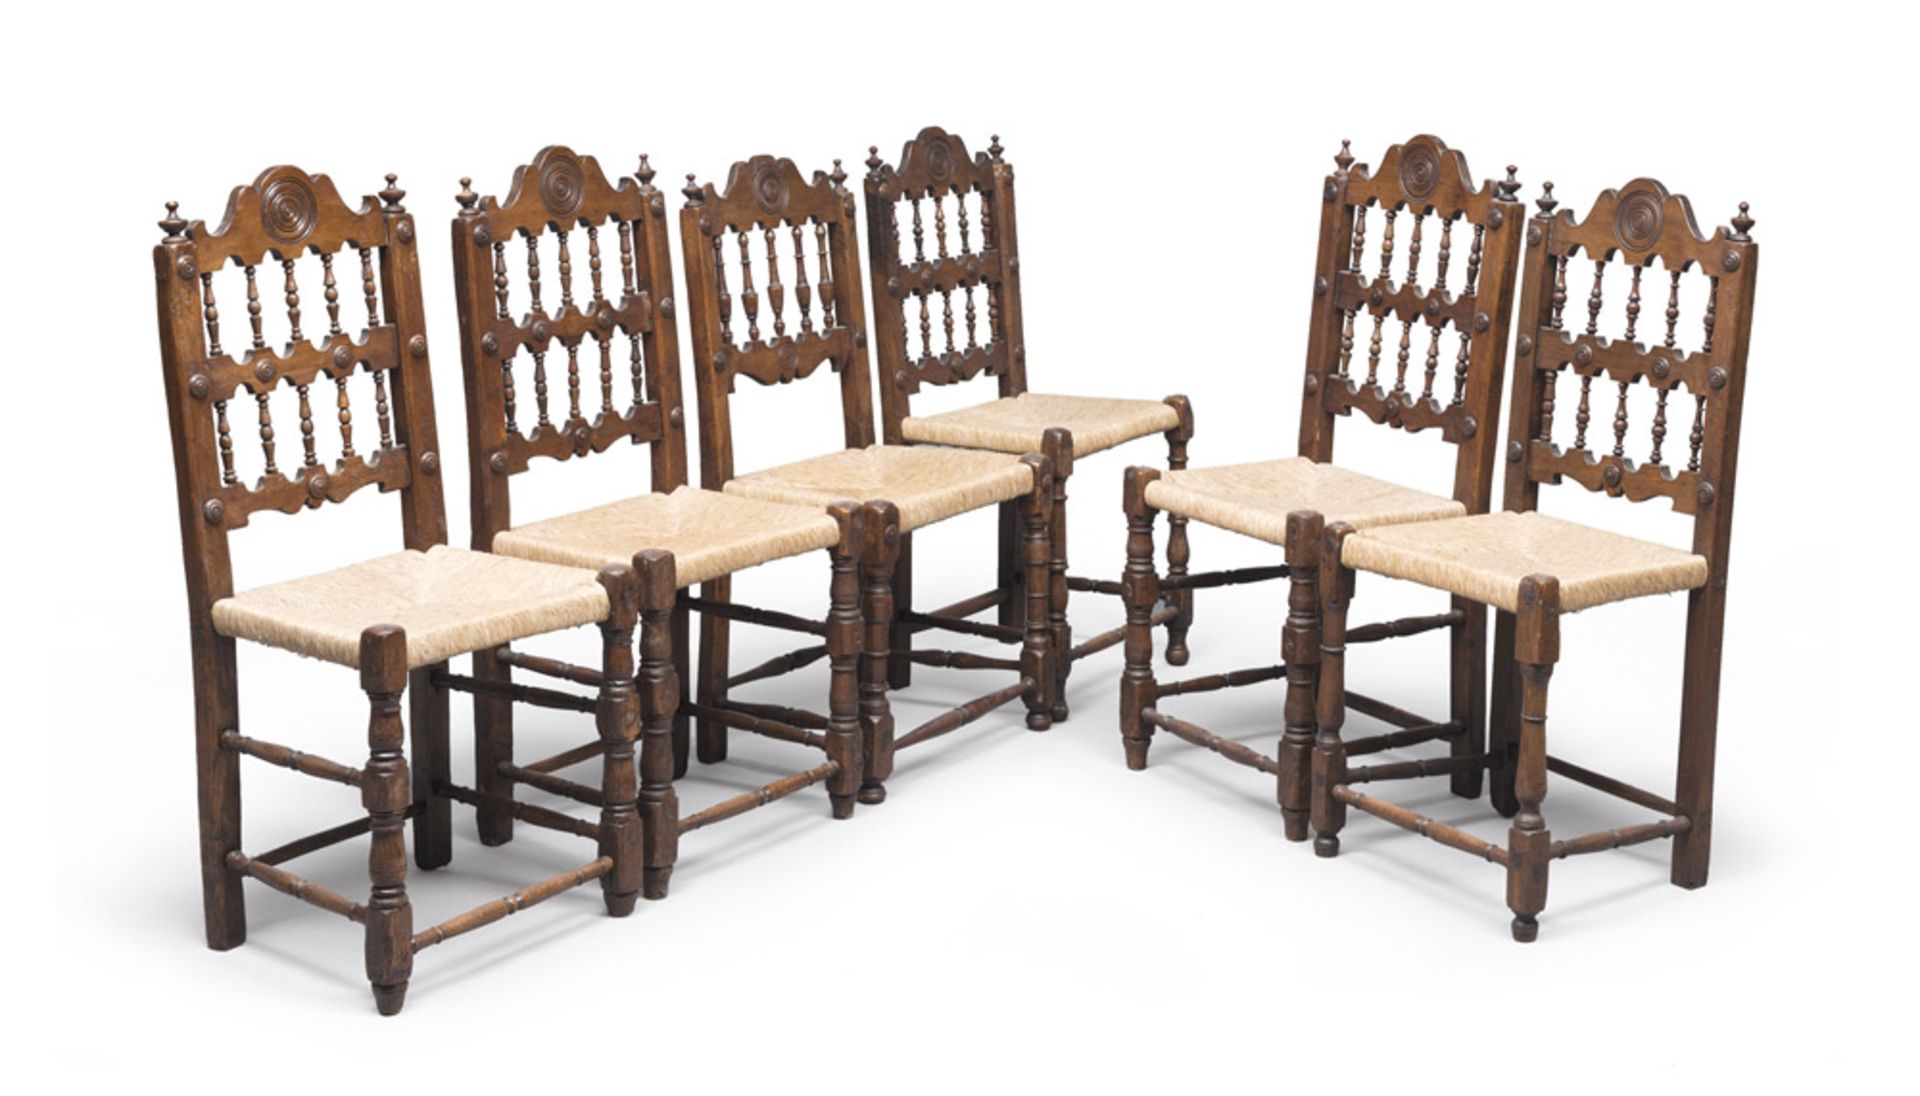 Six walnut-tree chairs with seats in straw – 19th century.